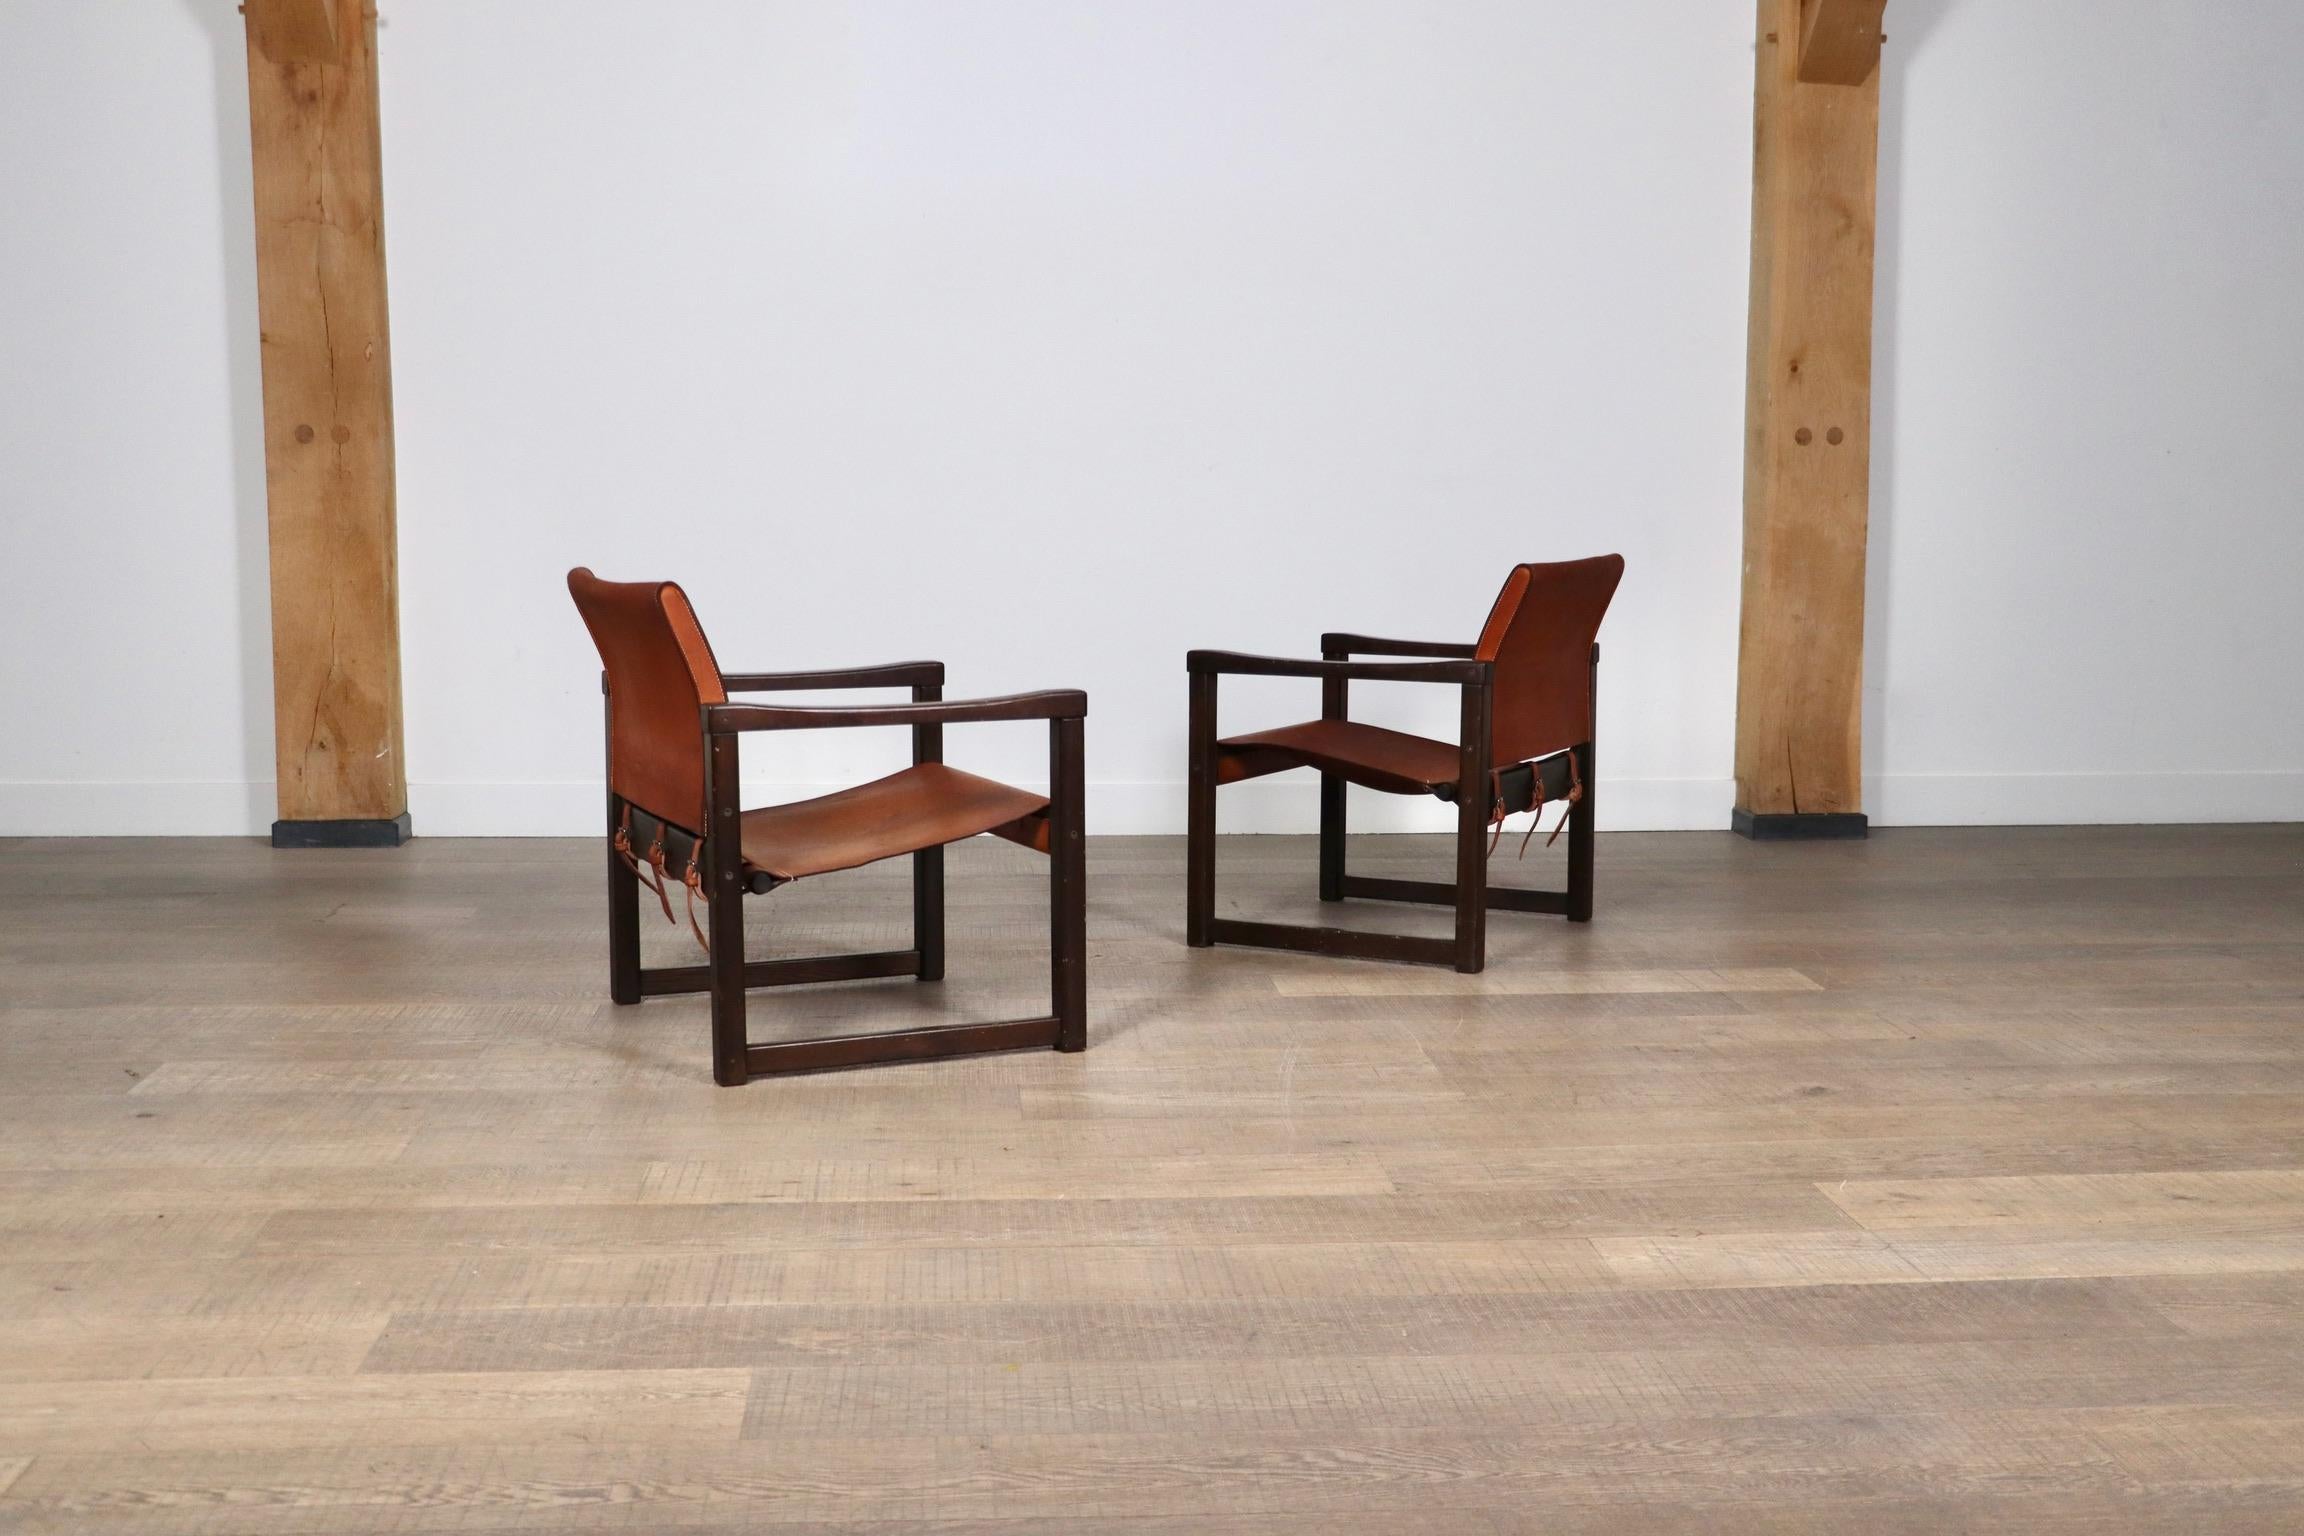 Pair Of Diana Safari Chairs By Karin Mobring In Cognac Leather For Ikea, 1970s 5